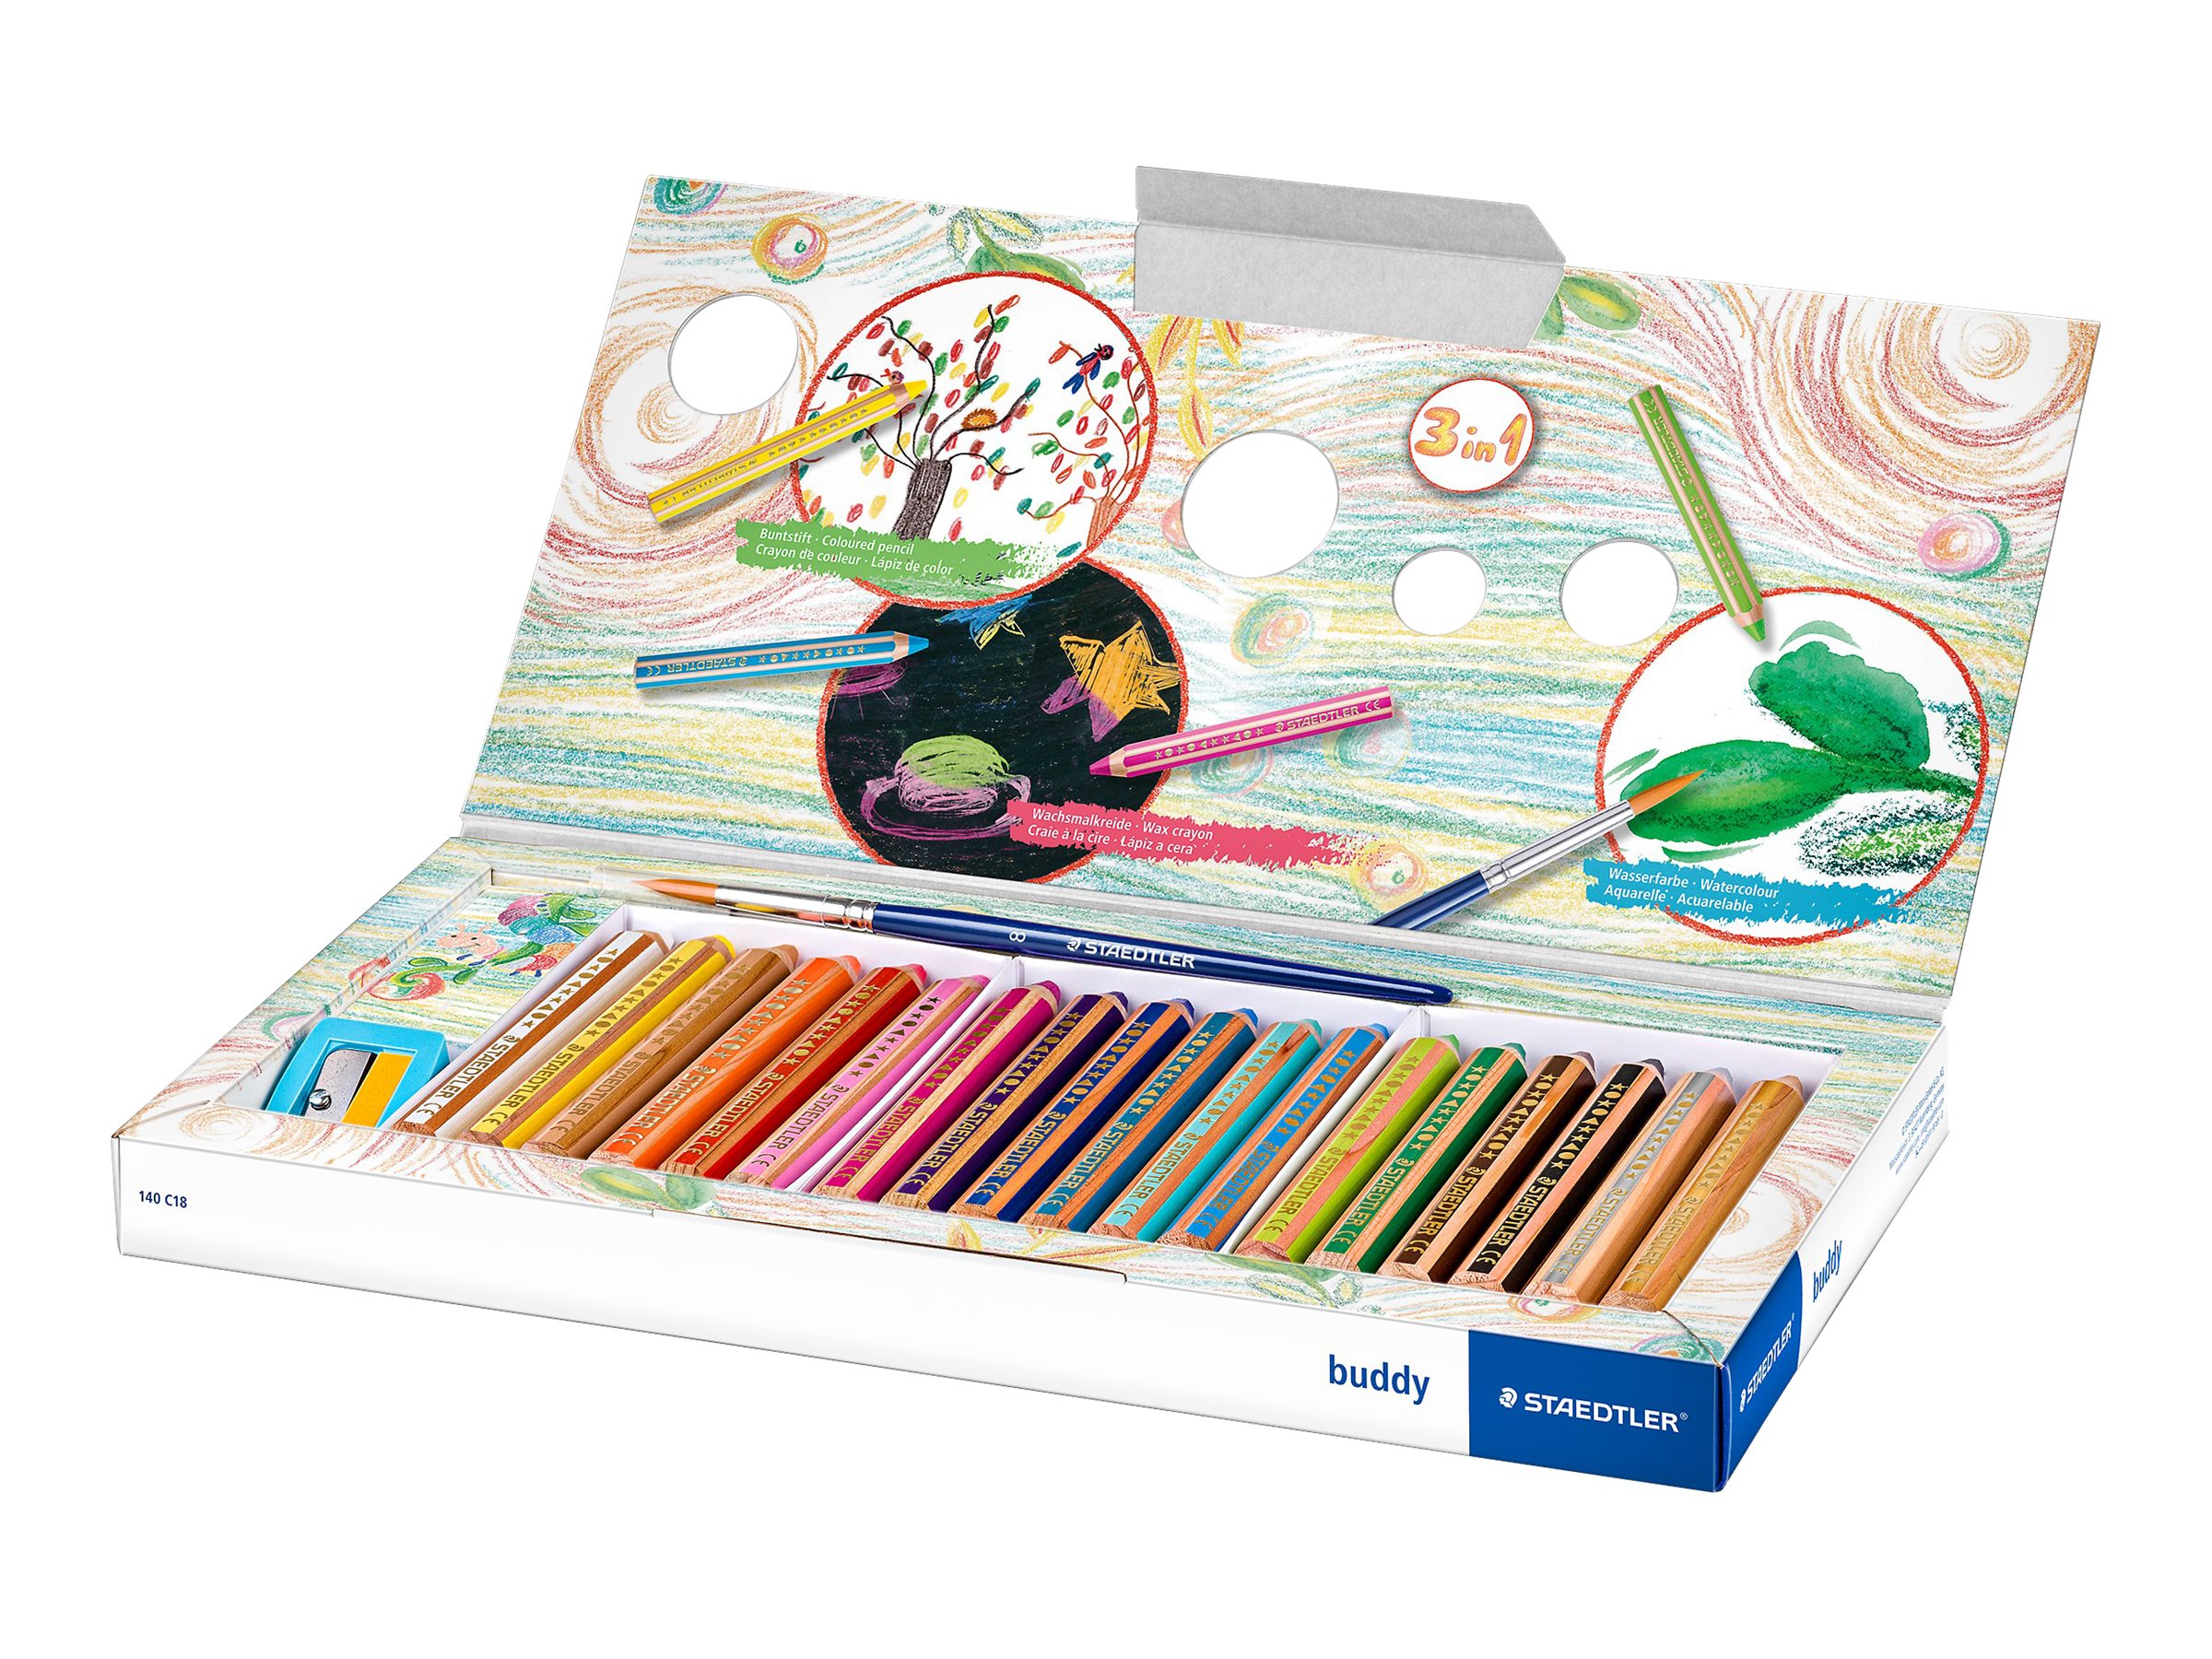 STAEDTLER Buddy - 18 Crayons de couleur - pointe large